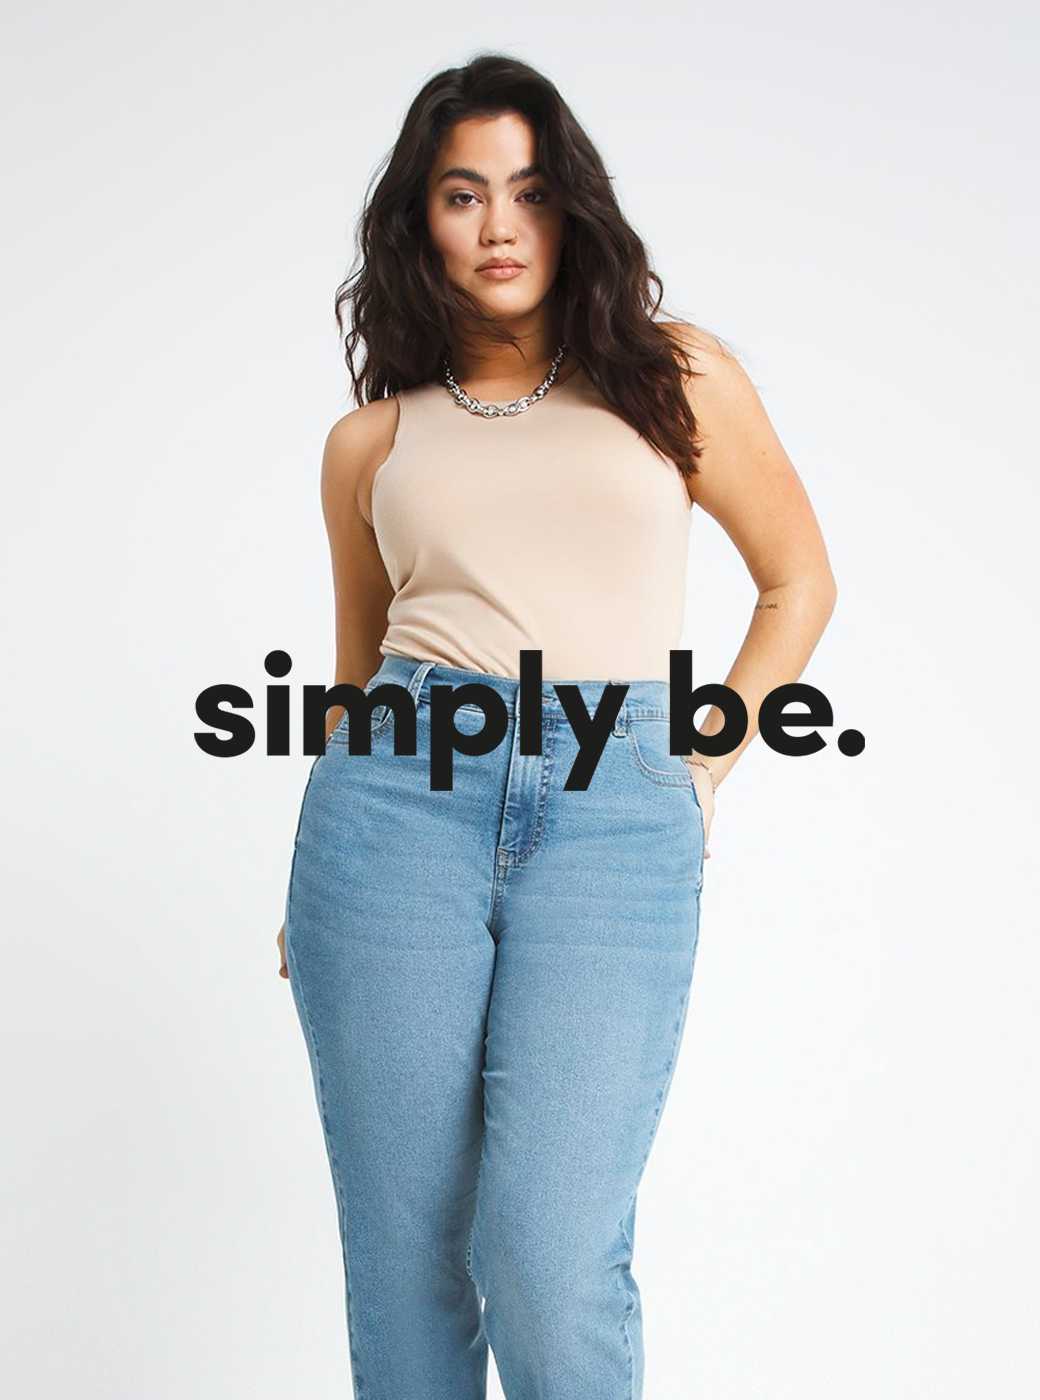 Women's Jeans Fit Guide, Types of Jeans and Styles at Tu